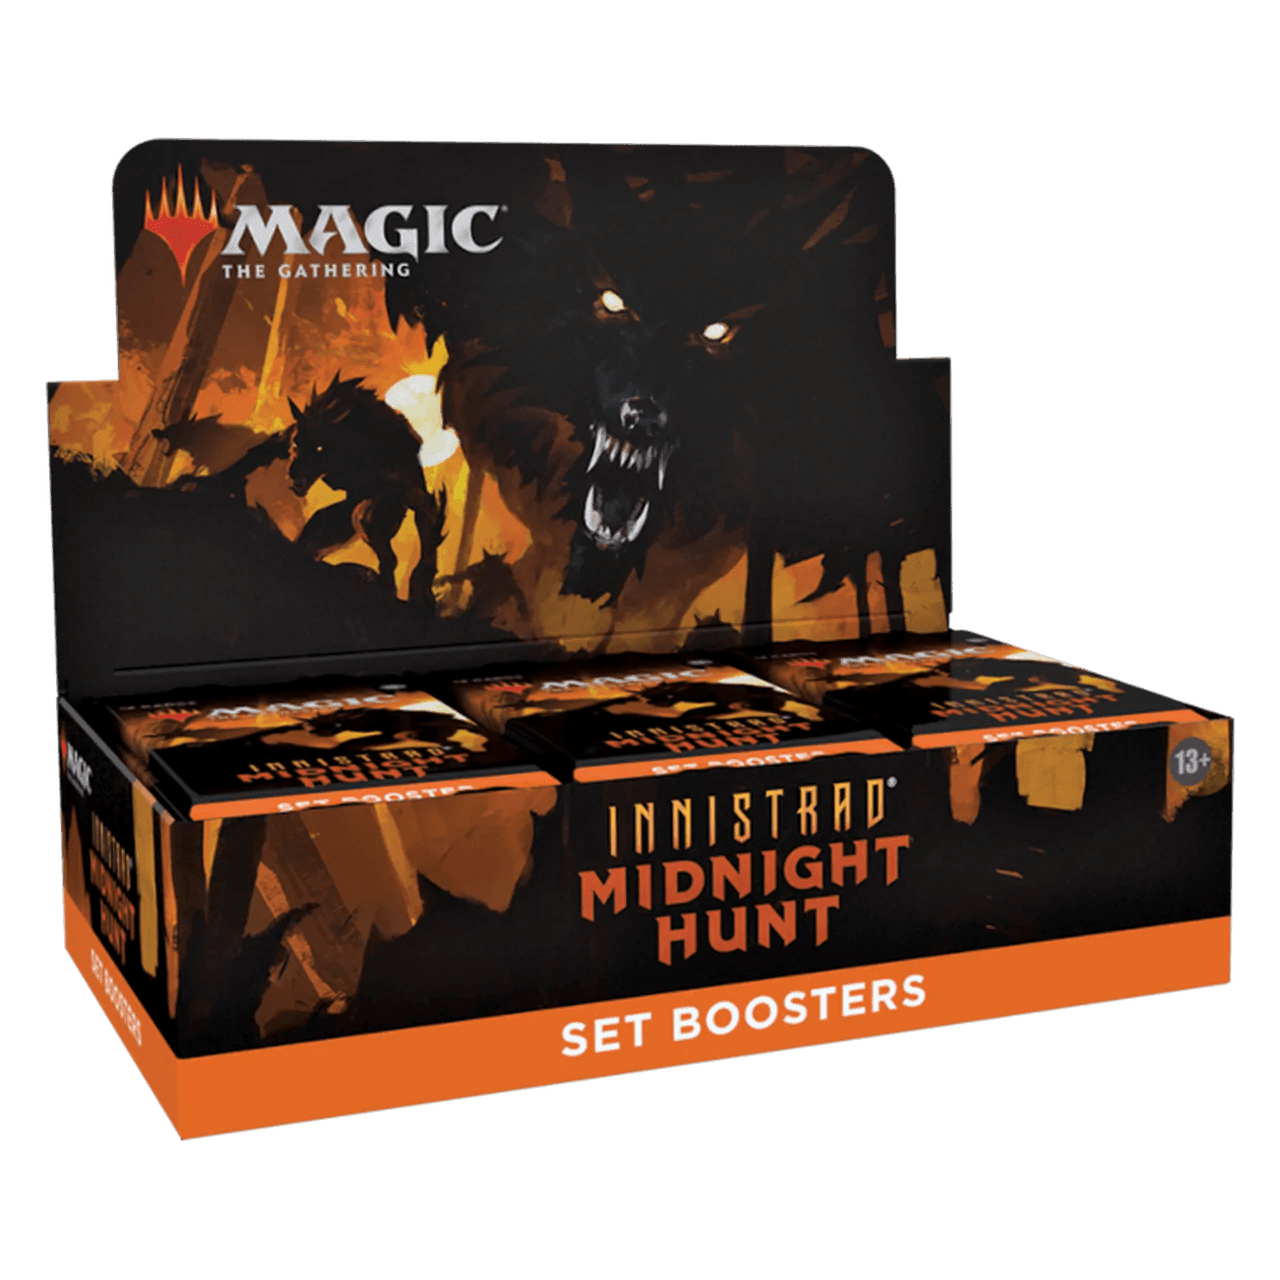 Magic: The Gathering - Innistrad: Midnight Hunt Set Booster Box - The Card Vault